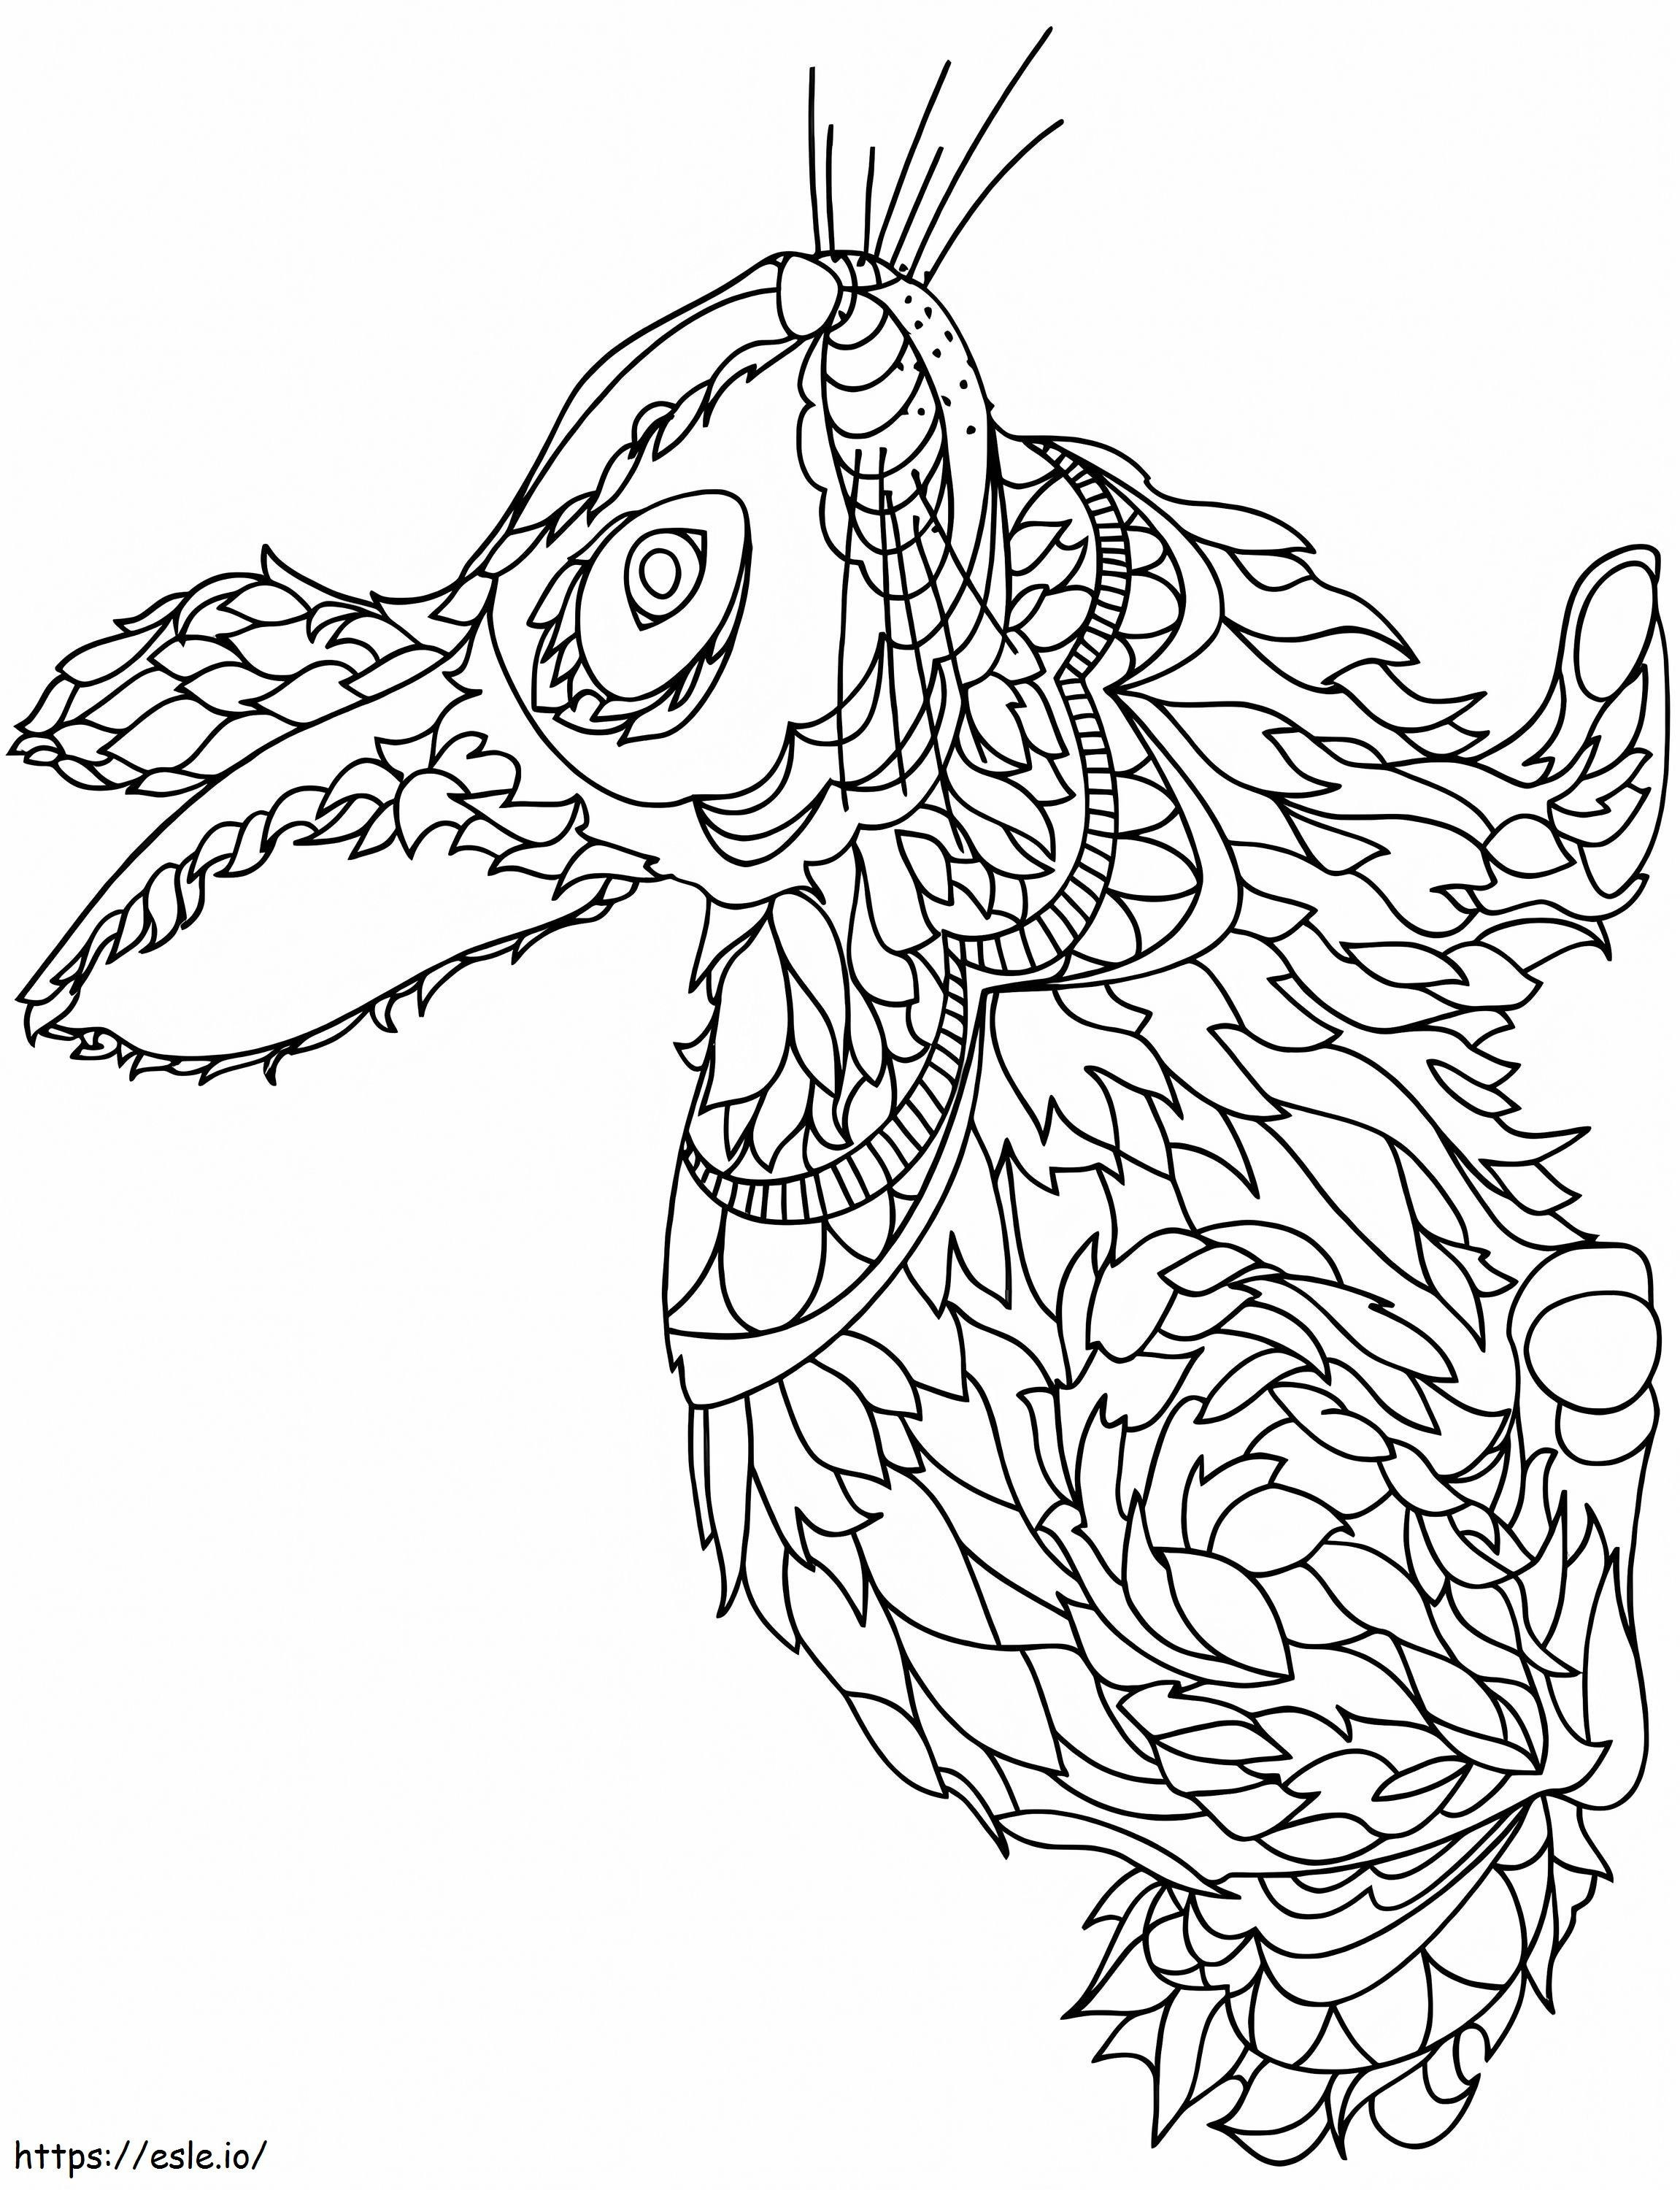 1562806962 Awesome Rabbit A4 coloring page